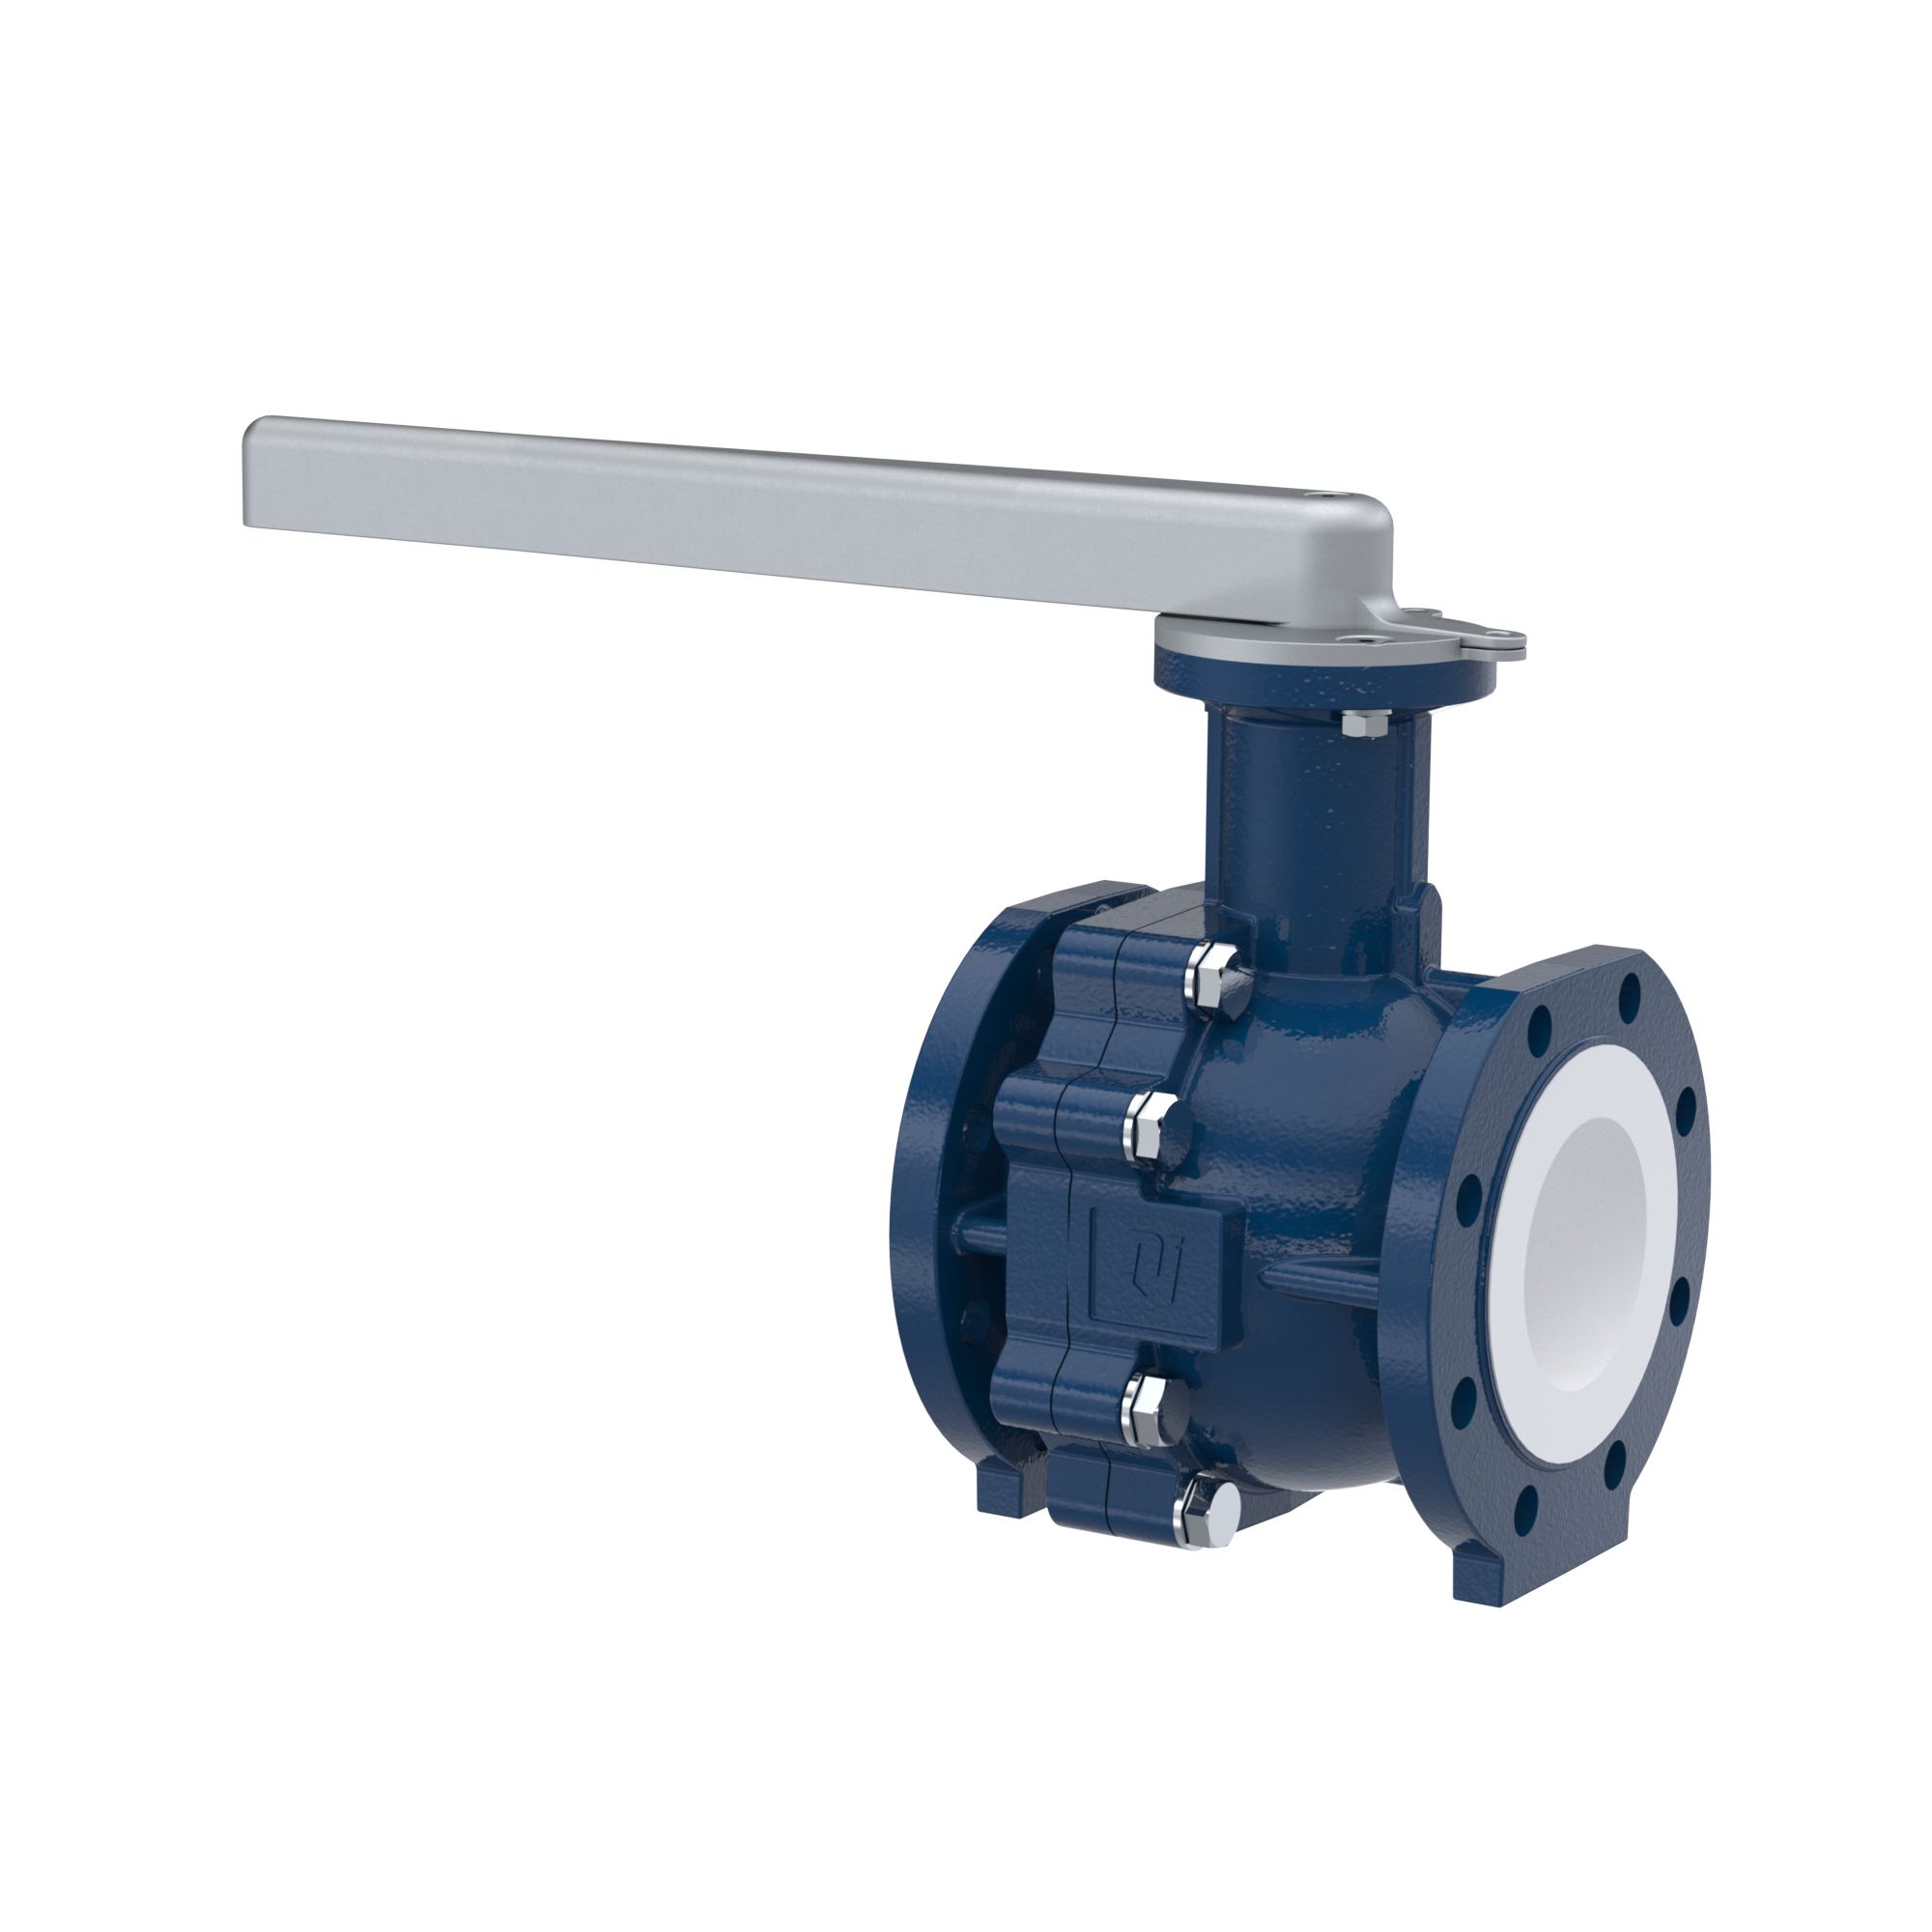 PFA-flange ball valve FK13 DN100 - 4" inch ANSI 150 made of spheroidal graphite cast iron with lever hand